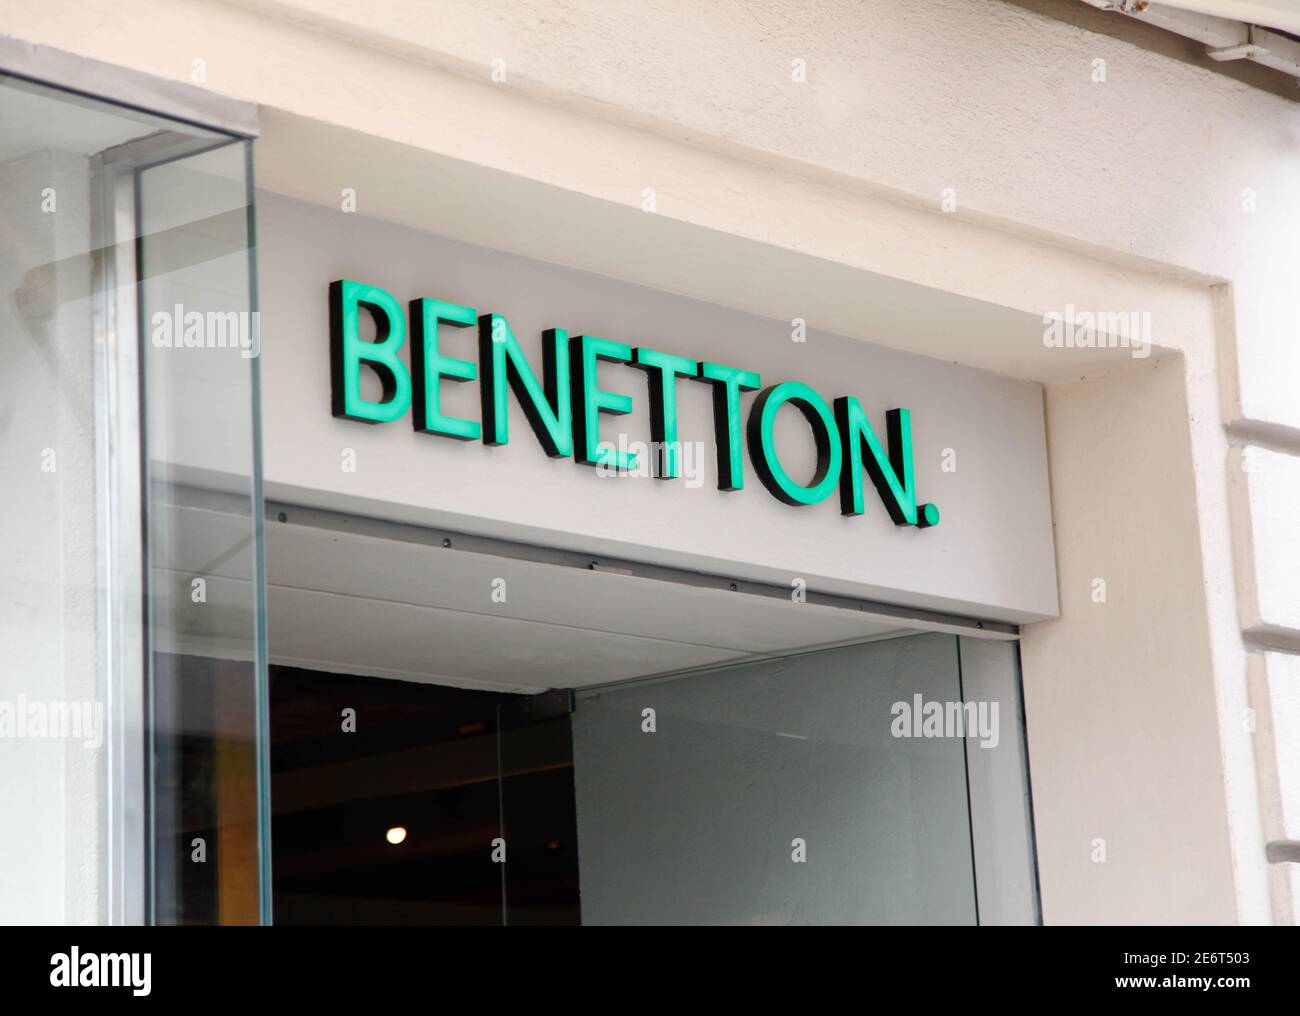 Page 2 - Benetton Logo High Resolution Stock Photography and Images - Alamy